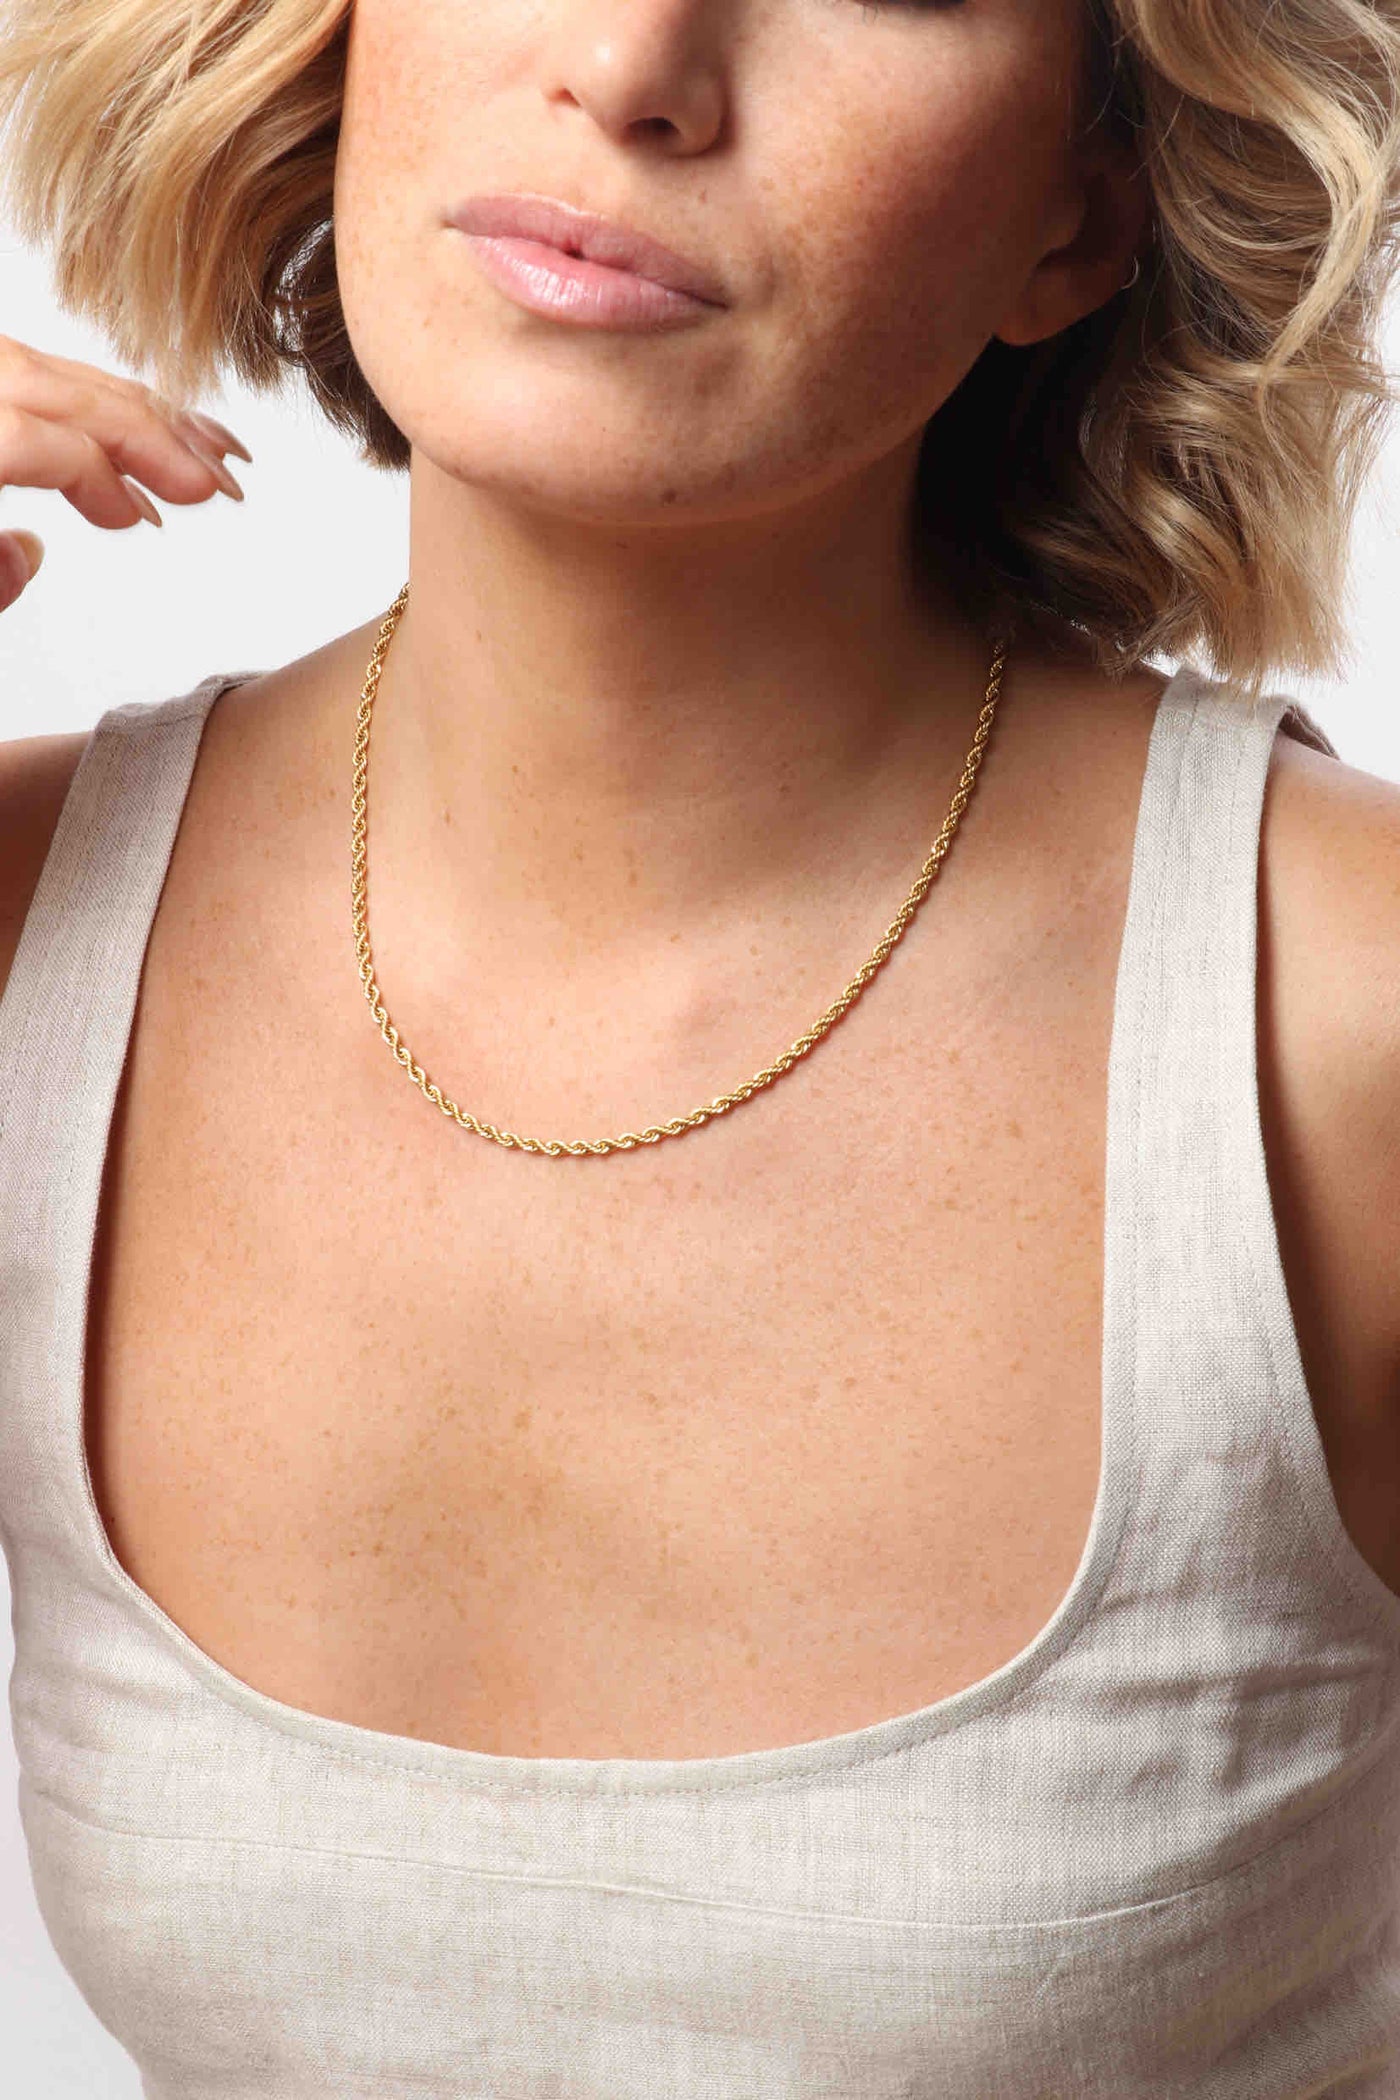 Marrin Costello wearing Marrin Costello Jewelry Helix 5mm Chain thick rope twist chain with lobster clasp closure and extender. Waterproof, sustainable, hypoallergenic. 14k gold plated stainless steel.